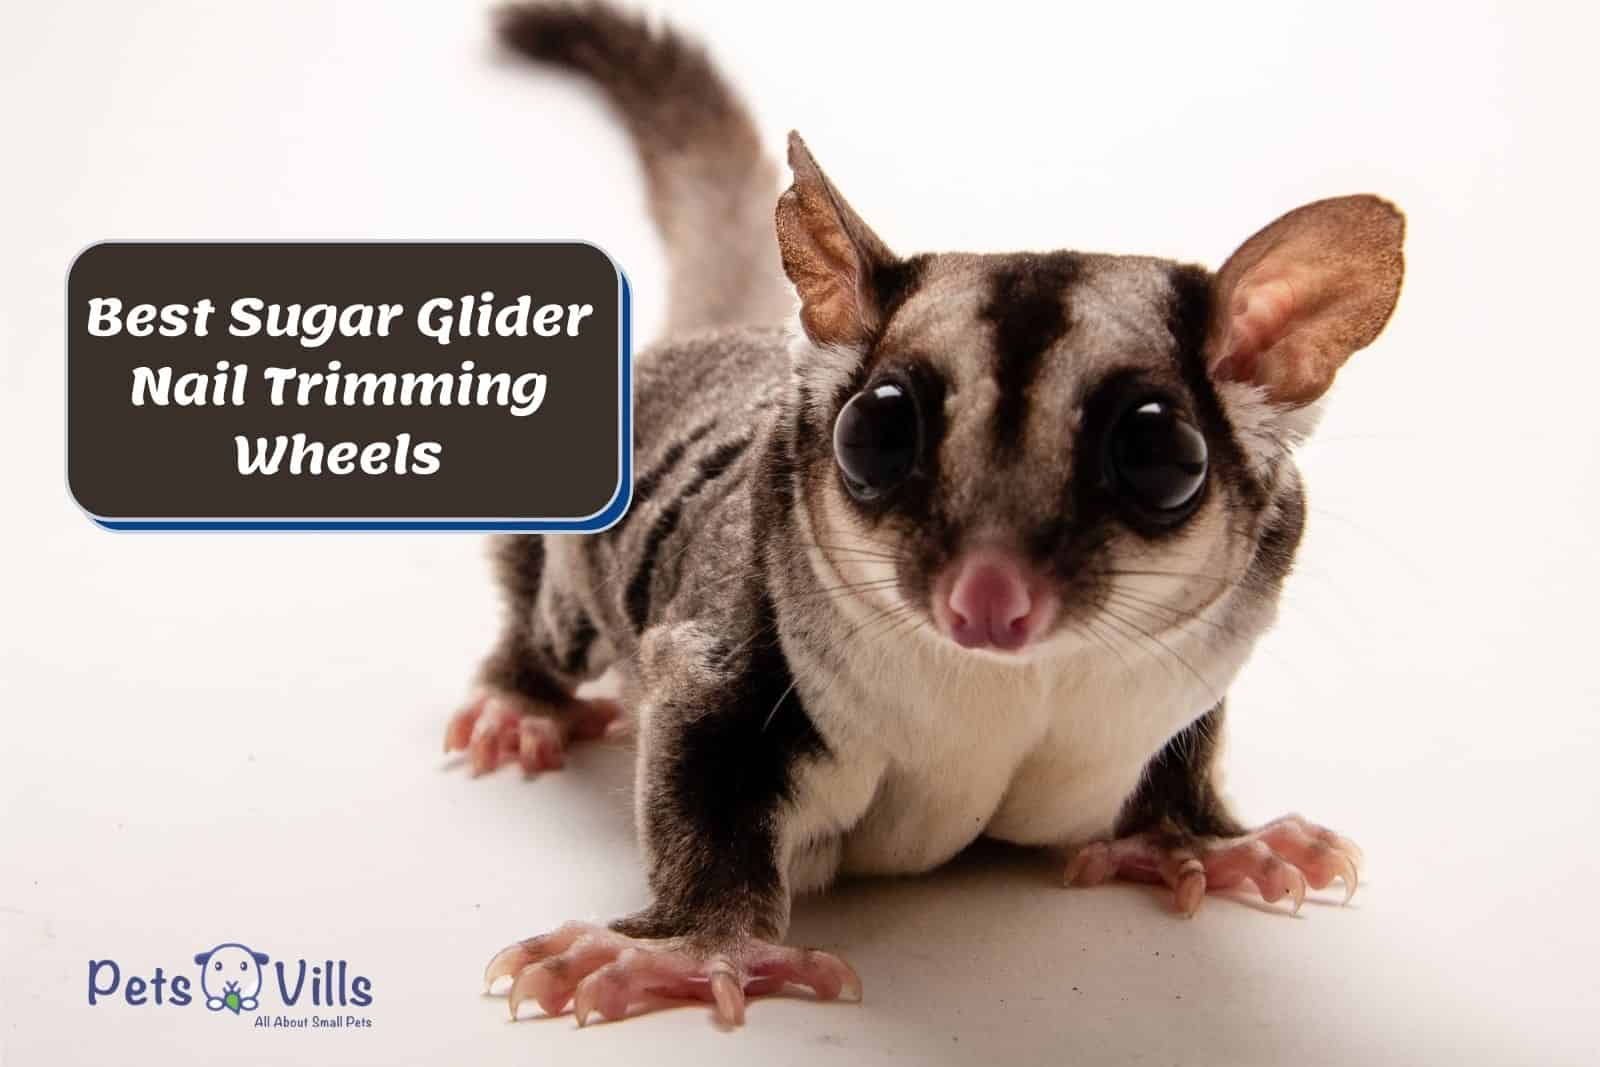 cute glider beside the Best Sugar Glider Nail Trimming Wheels poster